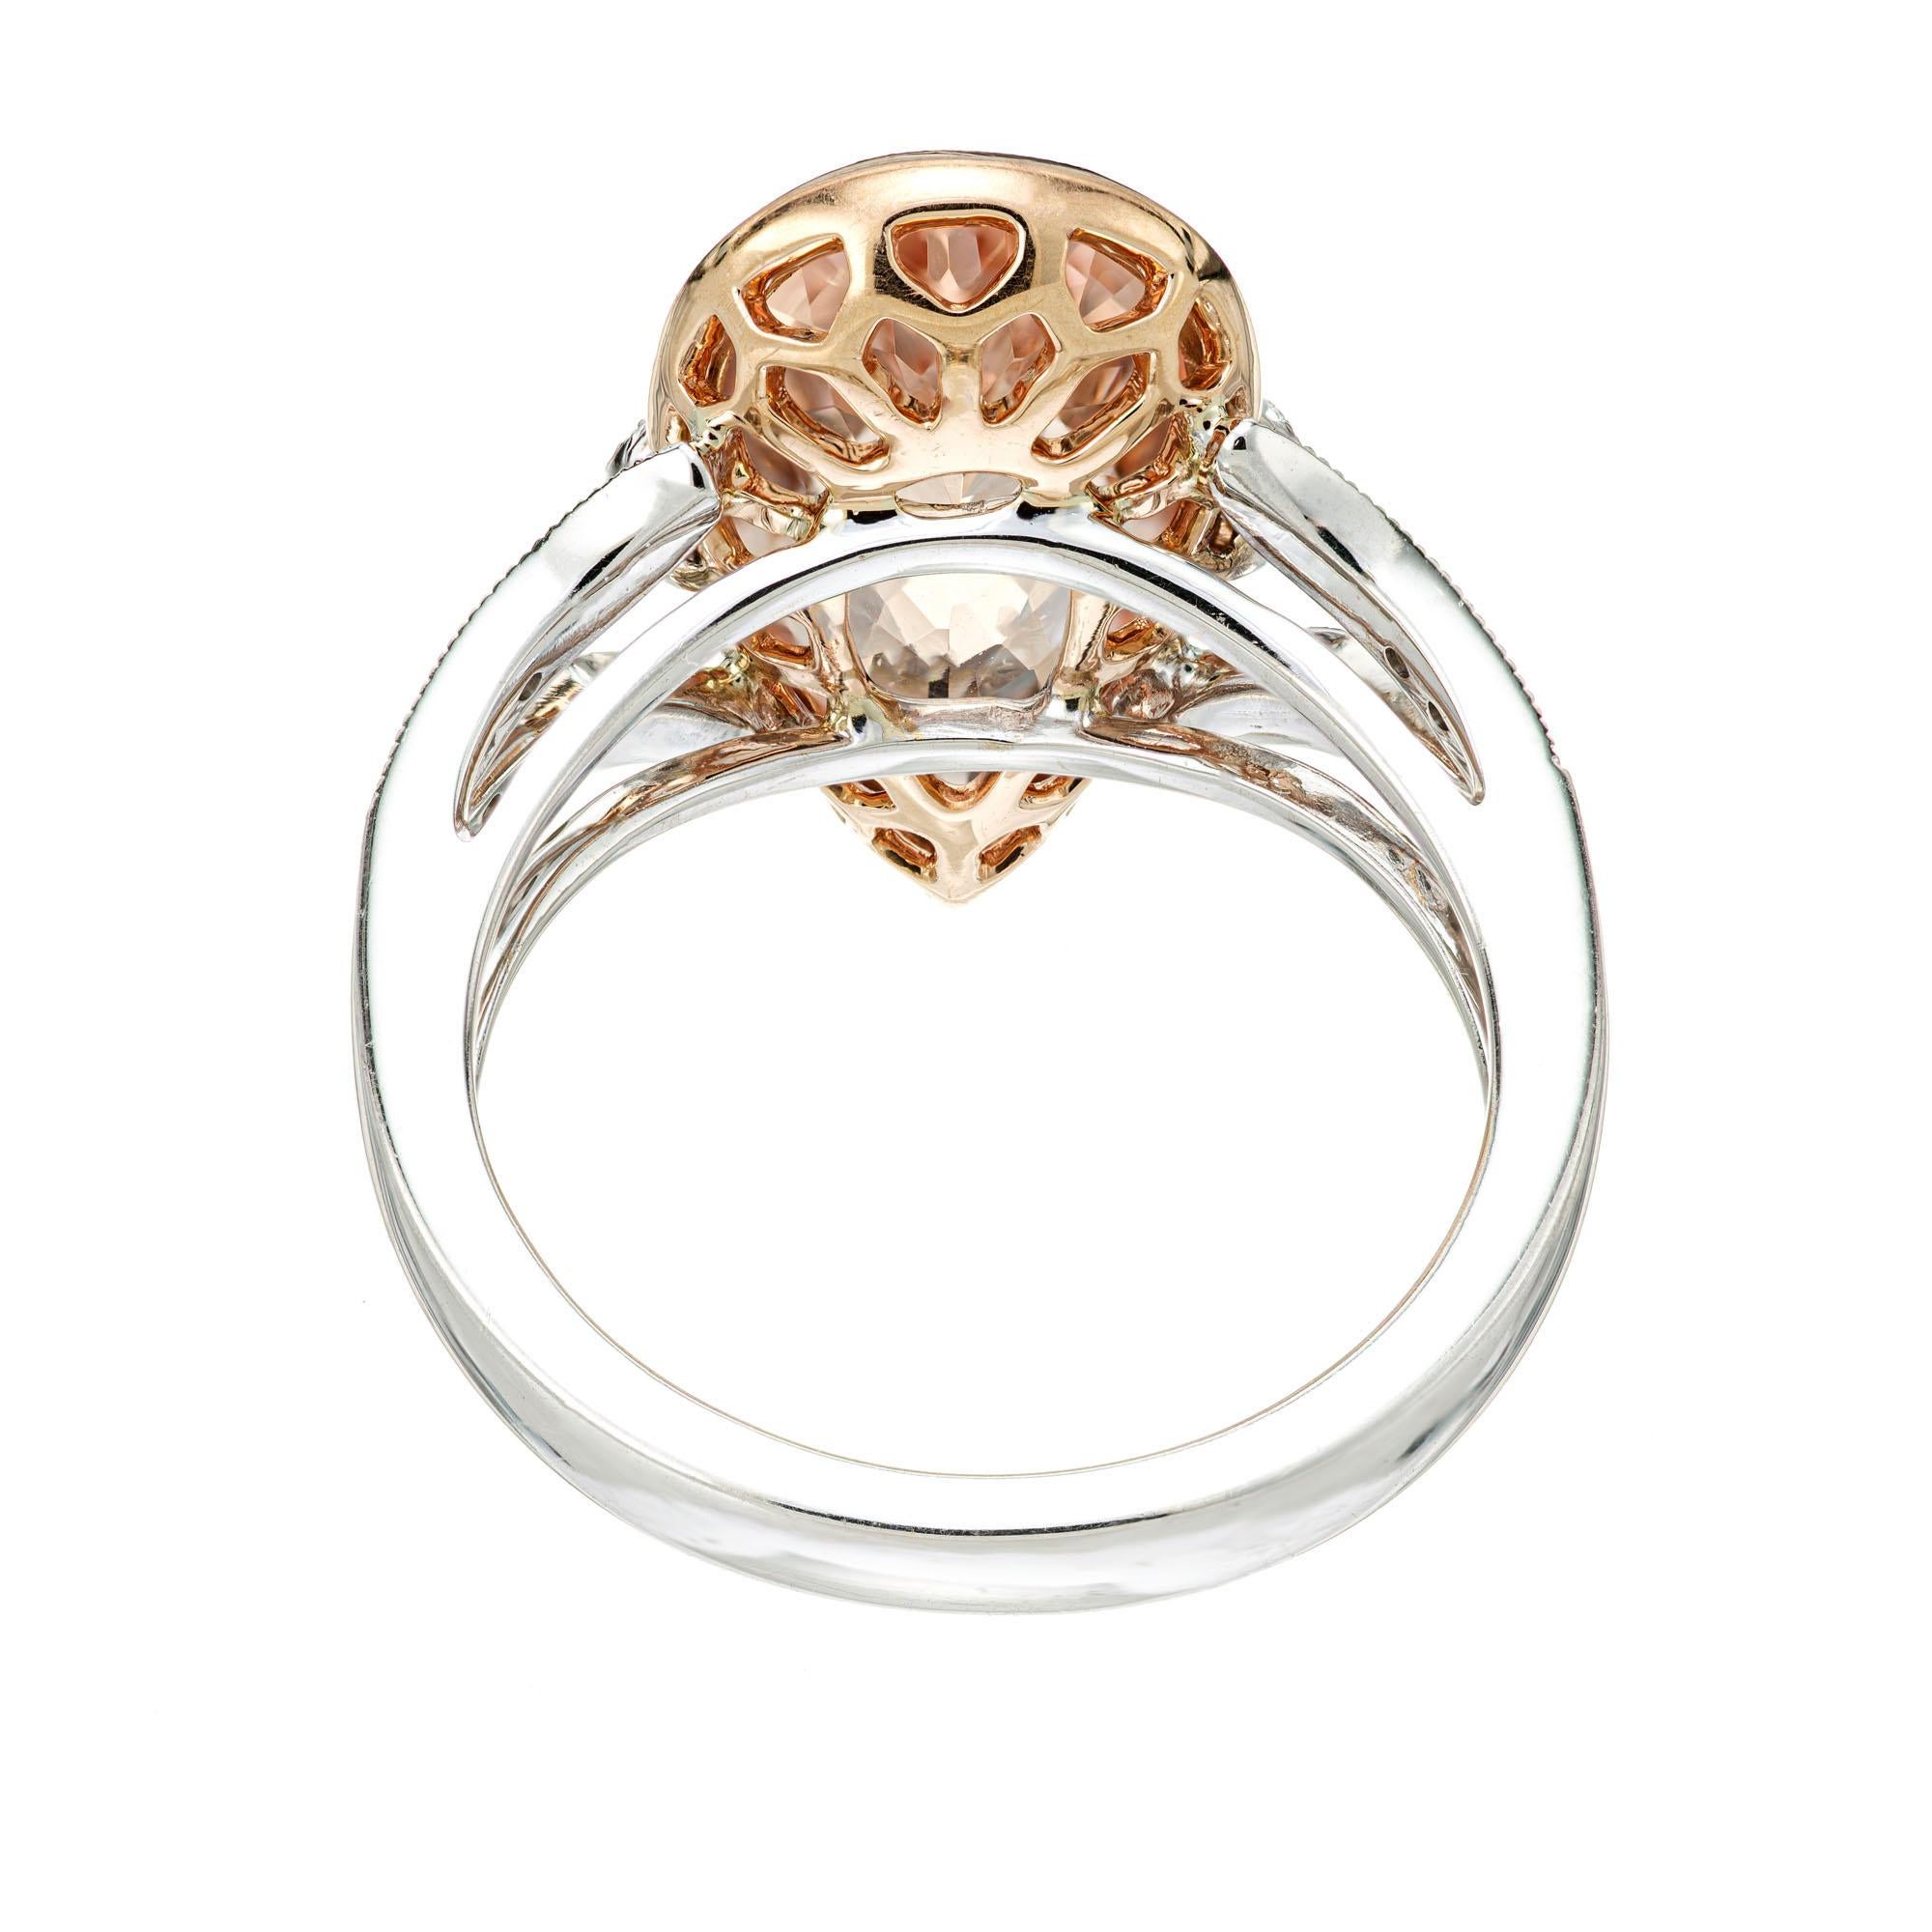 Peter Suchy 3.00 Carat Morganite Diamond Two-Tone Gold Cocktail Ring In New Condition For Sale In Stamford, CT